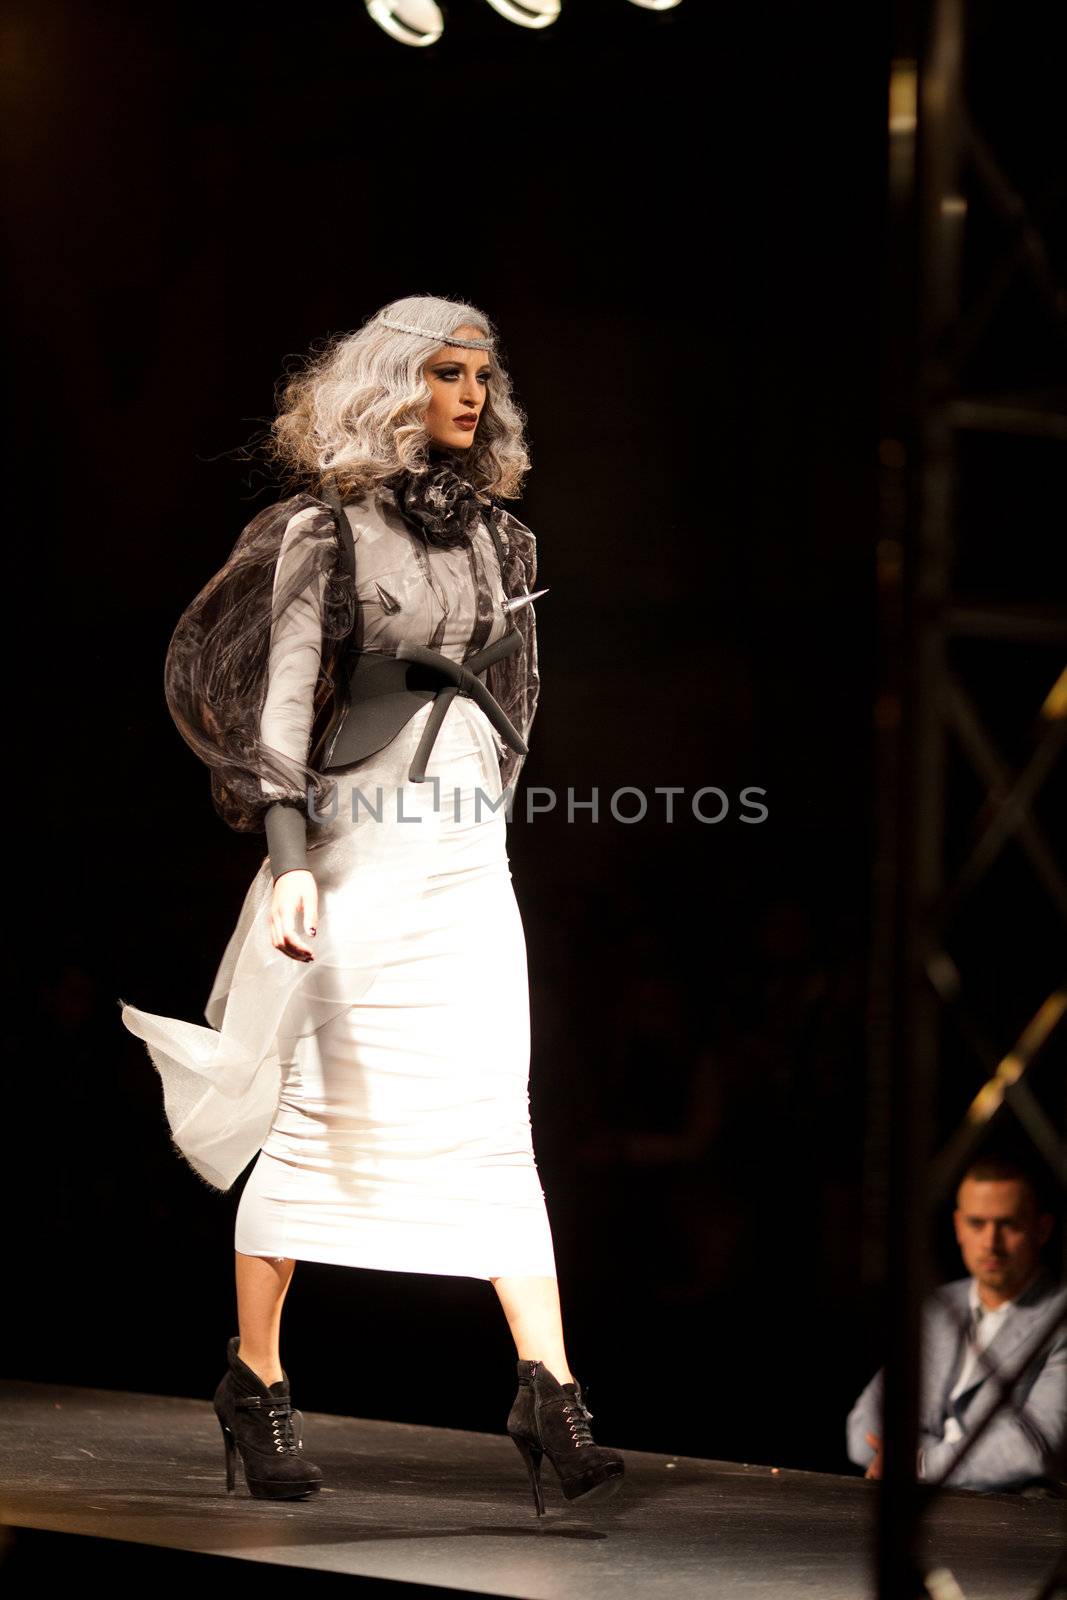 PRAGUE-SEPTEMBER 24: A model walks the runway during the 2011 au by jannyjus